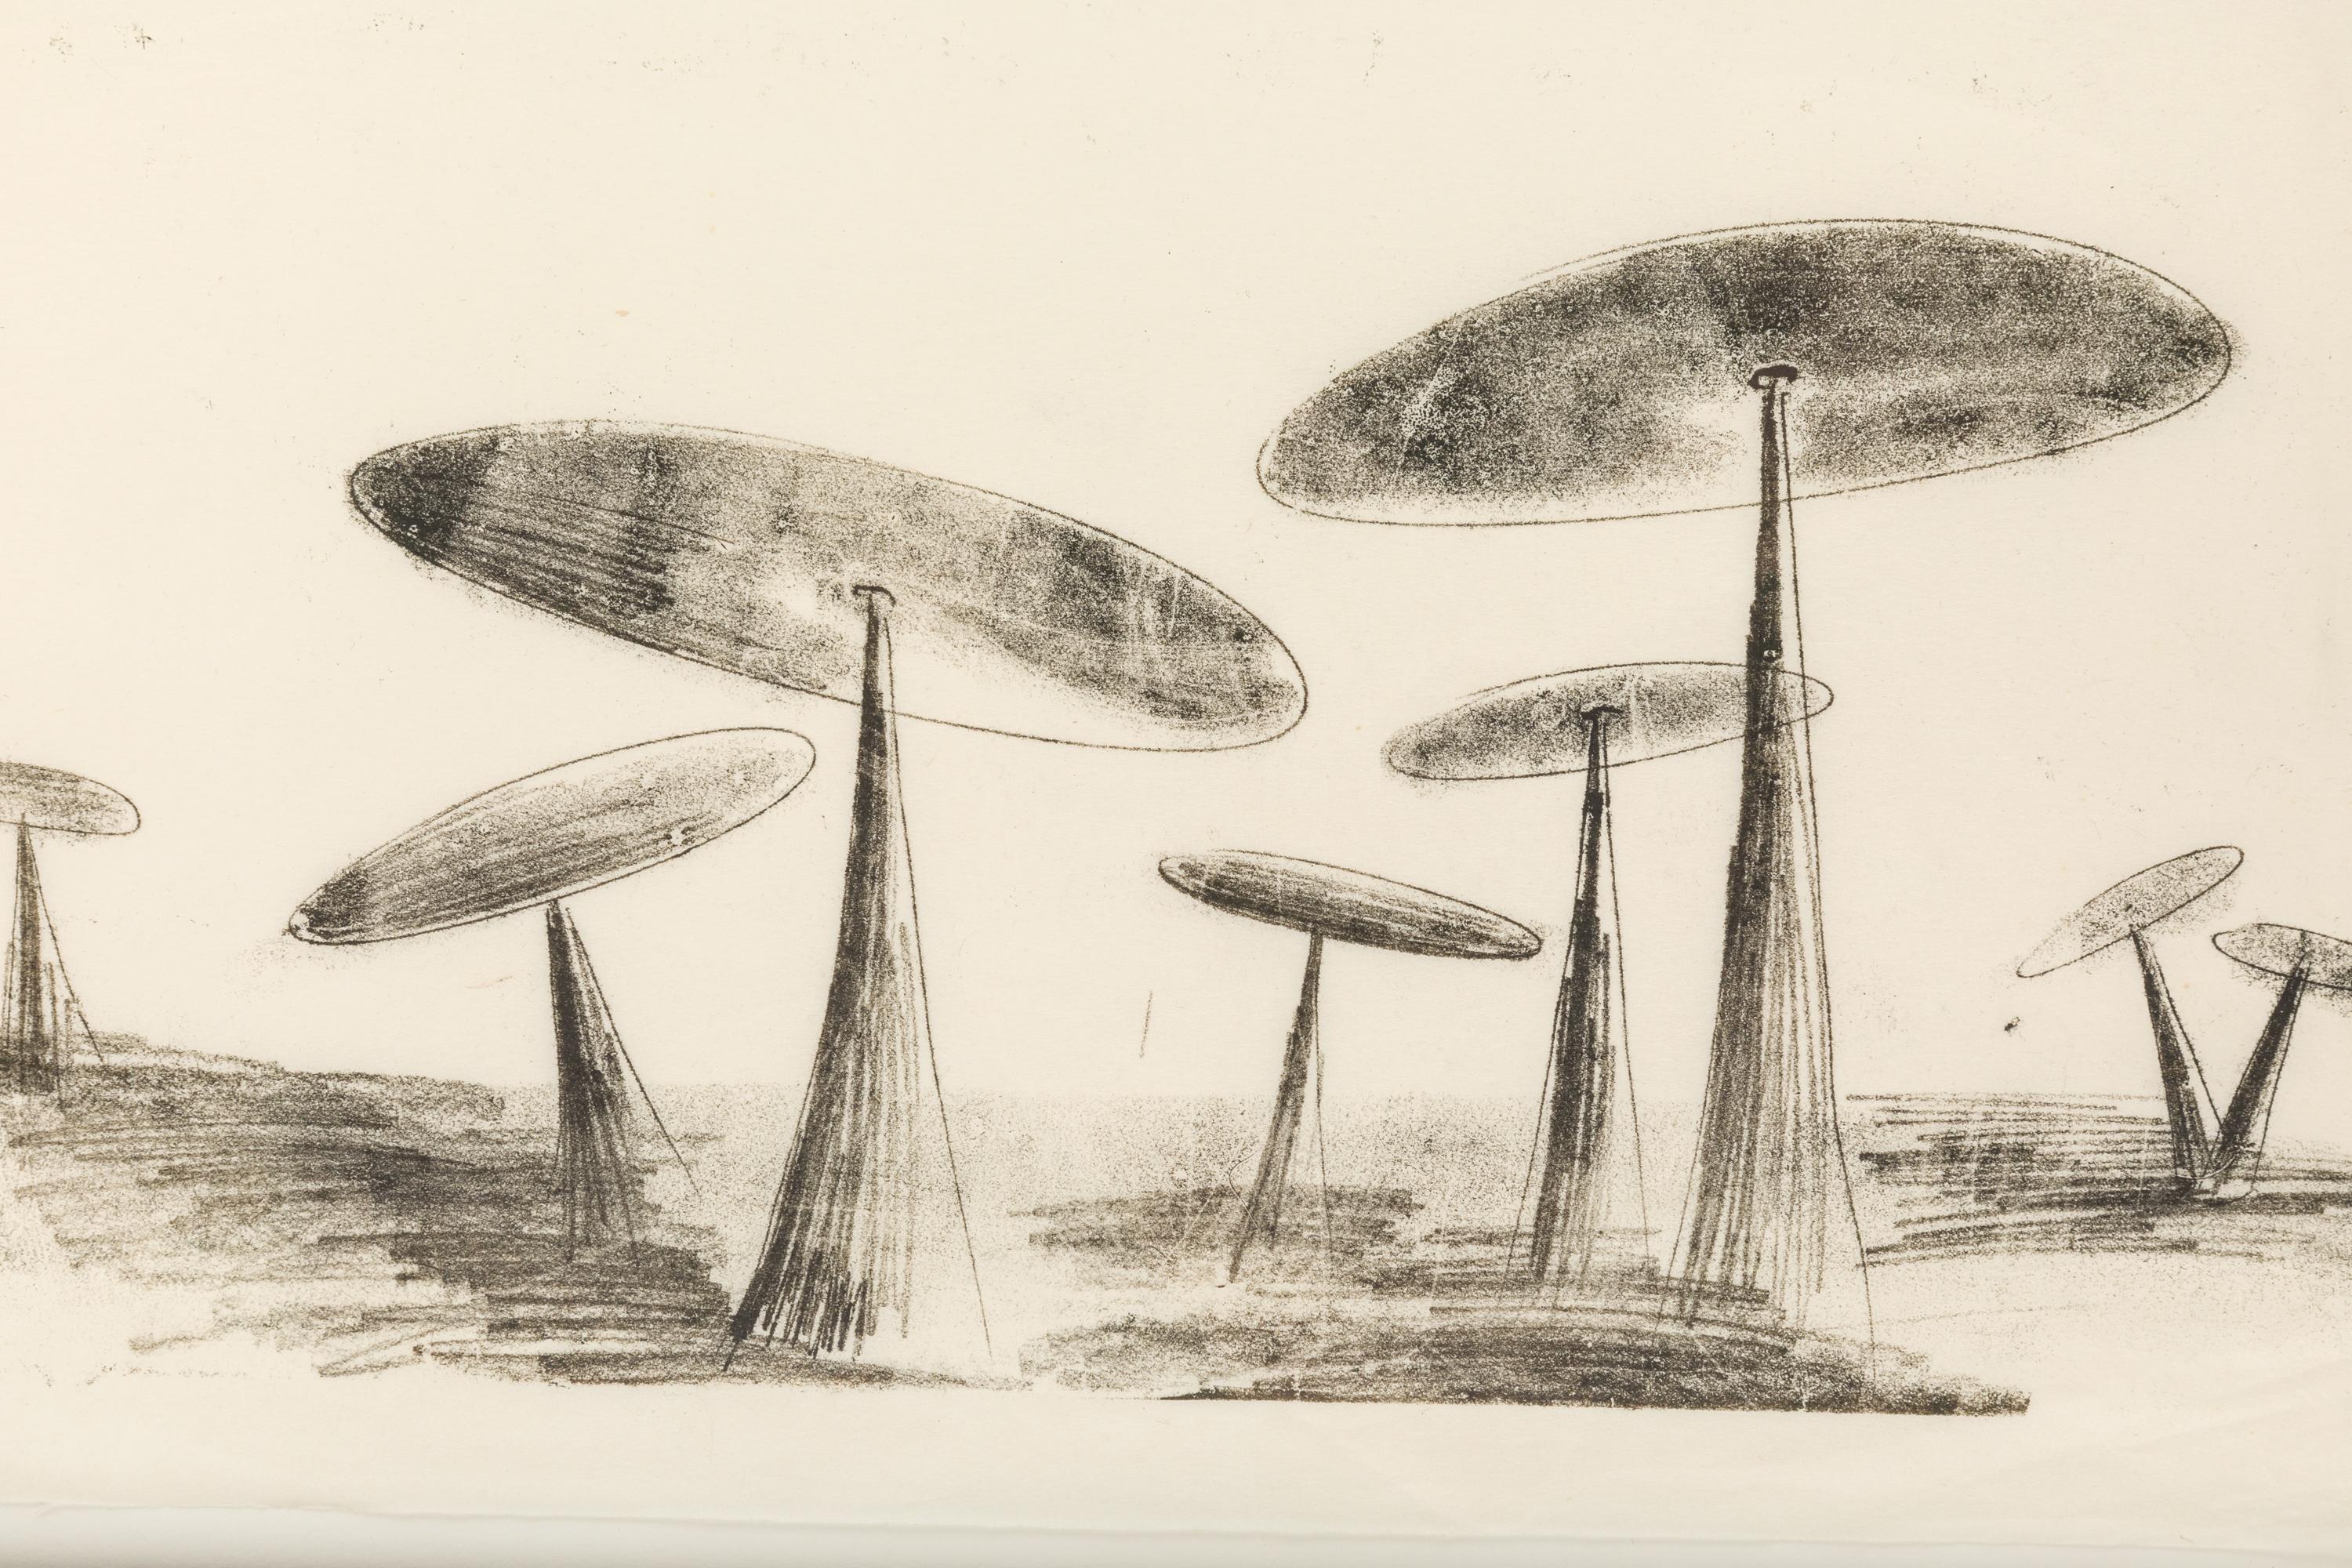 Bertoia created hundreds if not thousands of one of a kind monoprints in his career, often as working drawings for his sculpture works. He employed a variety of techniques to arrive at his unique ends, most often scribing the reverse of a paper on